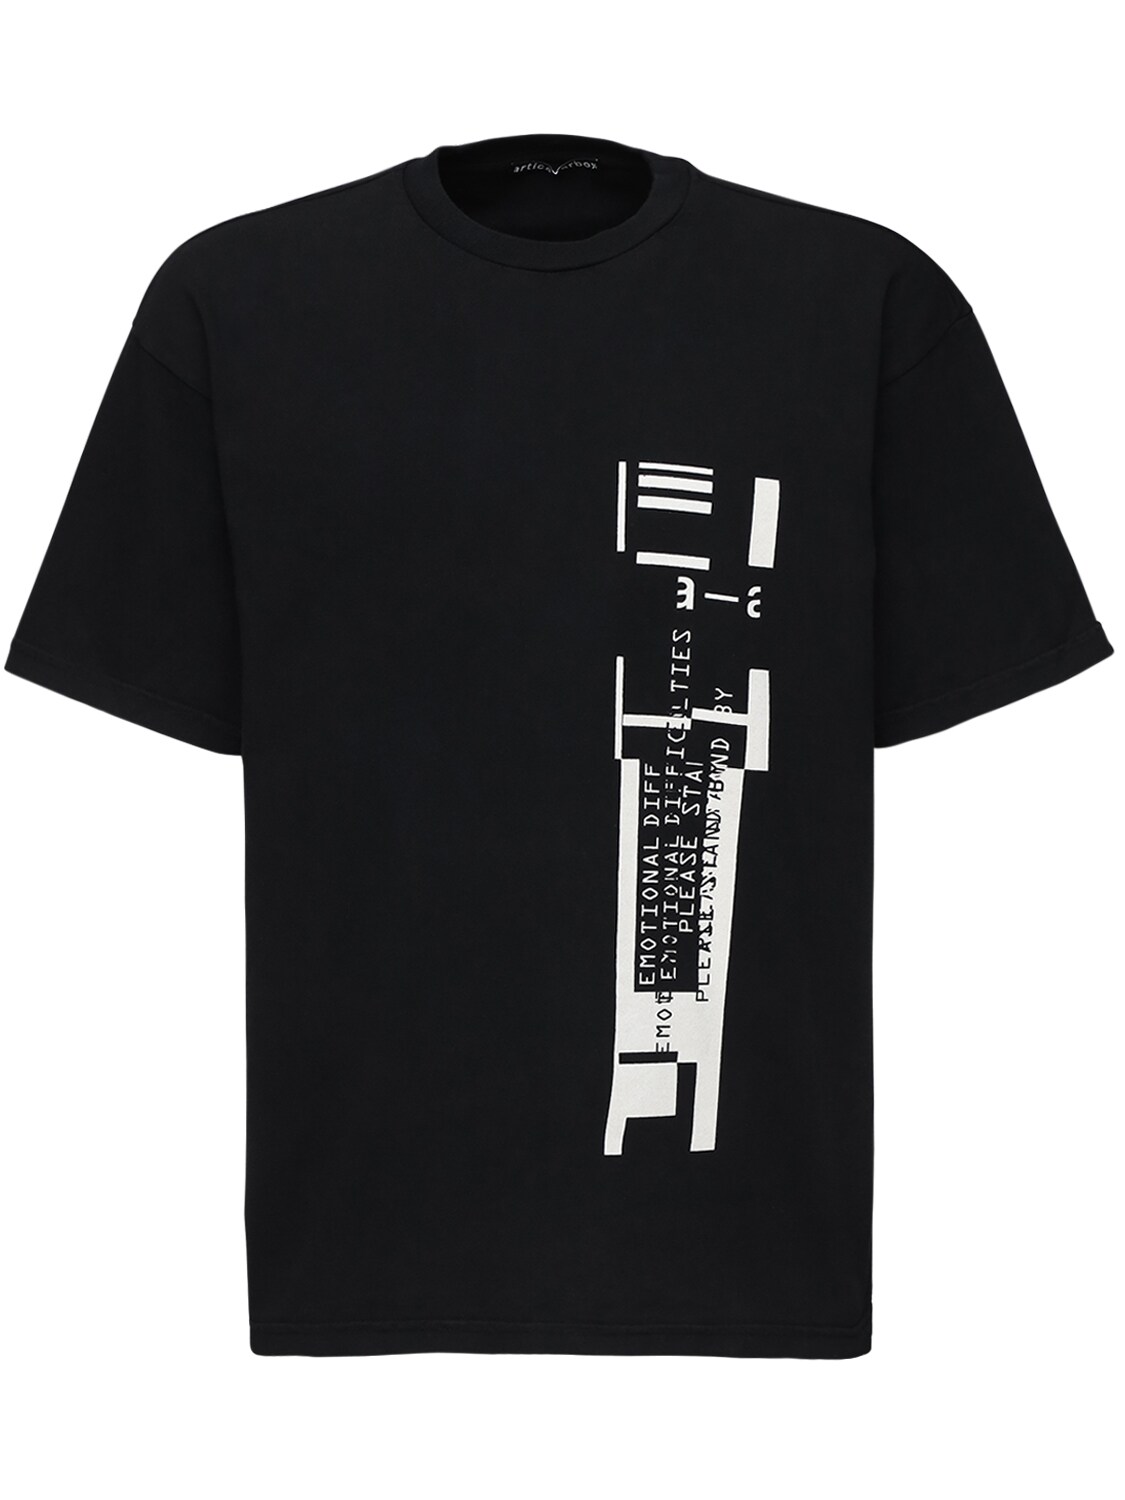 A-a   Artica-arbox Emotional Printed Cotton Jersey T-shirt In Black